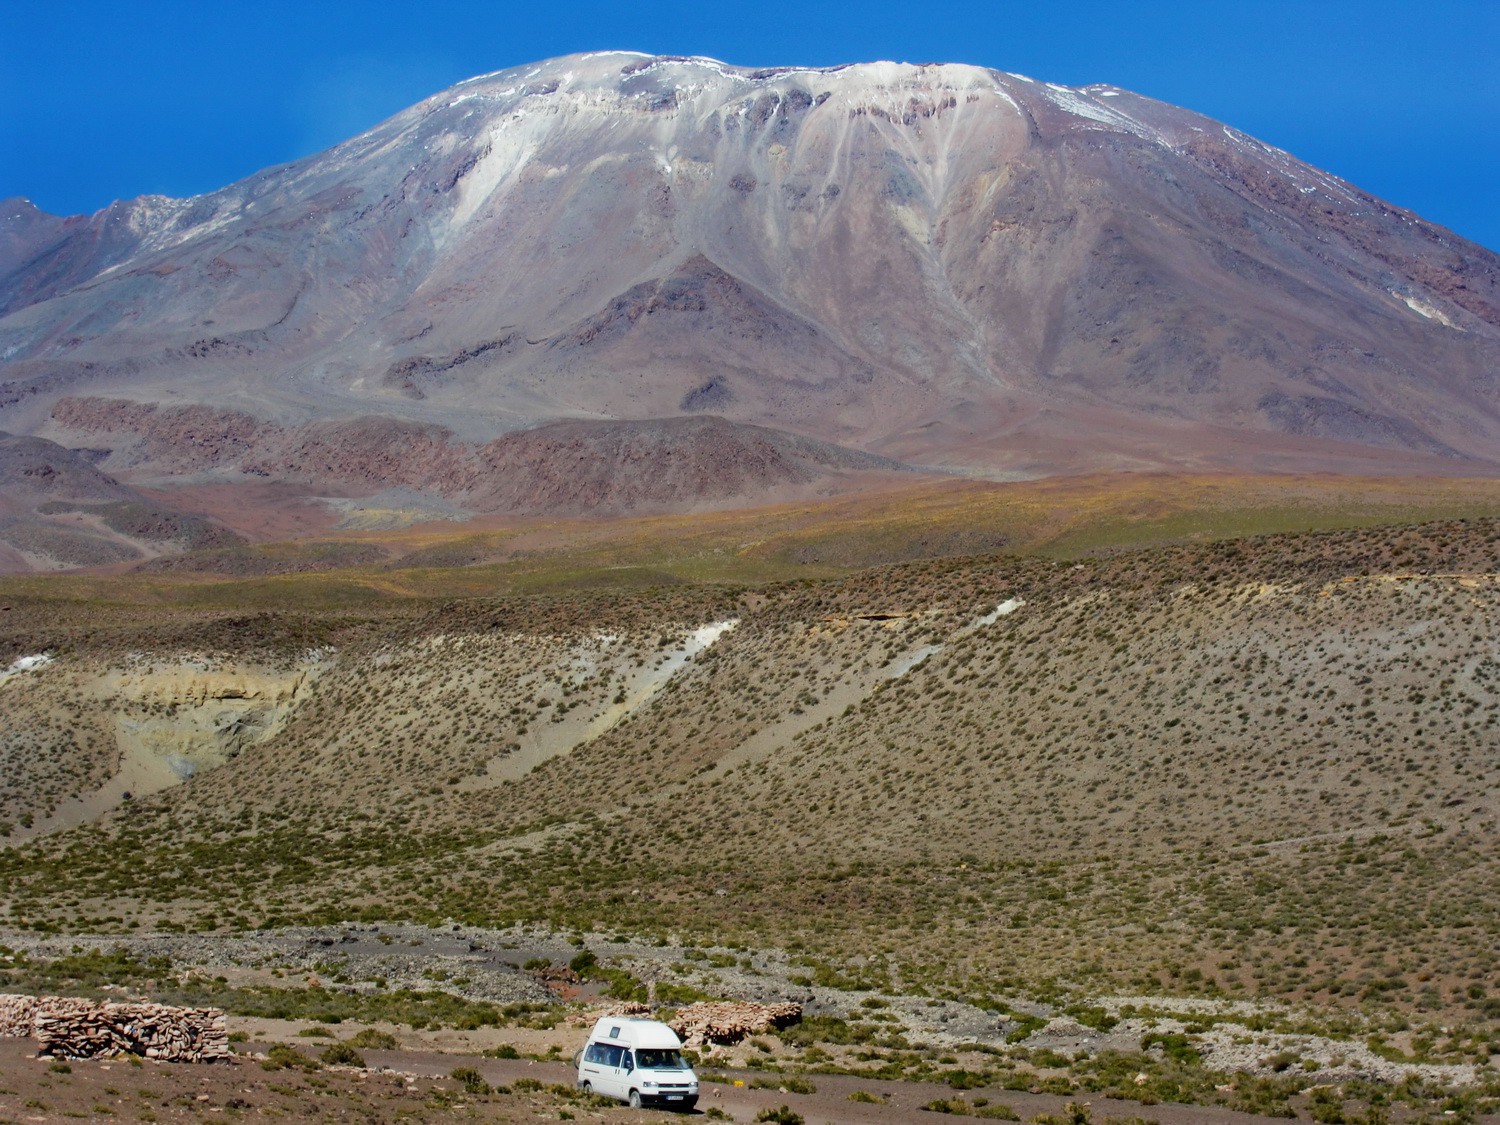 Volcano Lascar with our car